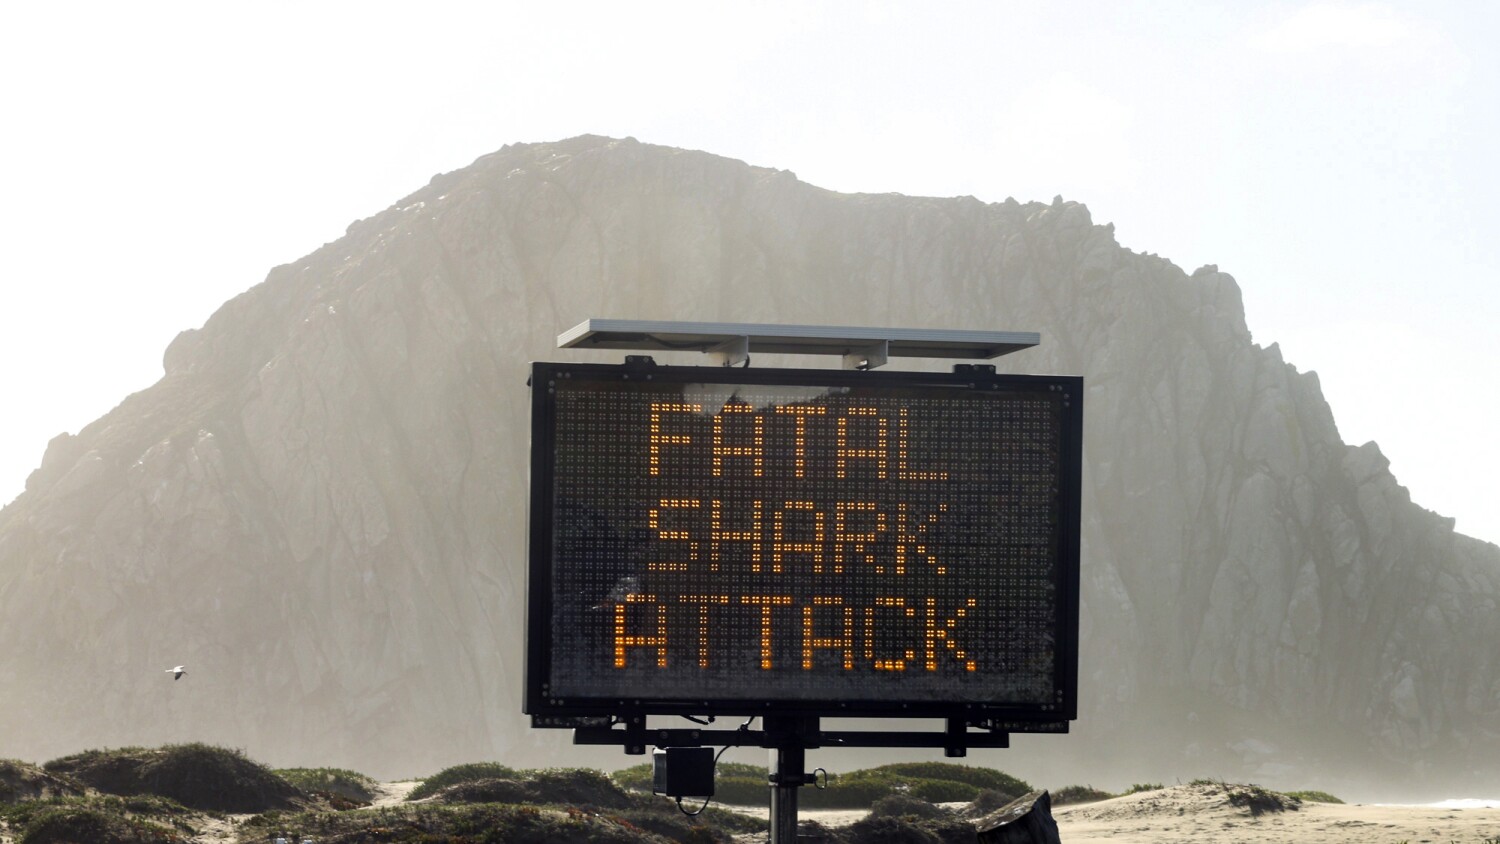 Great white shark killed bodyboarder in Morro Bay last year, officials say